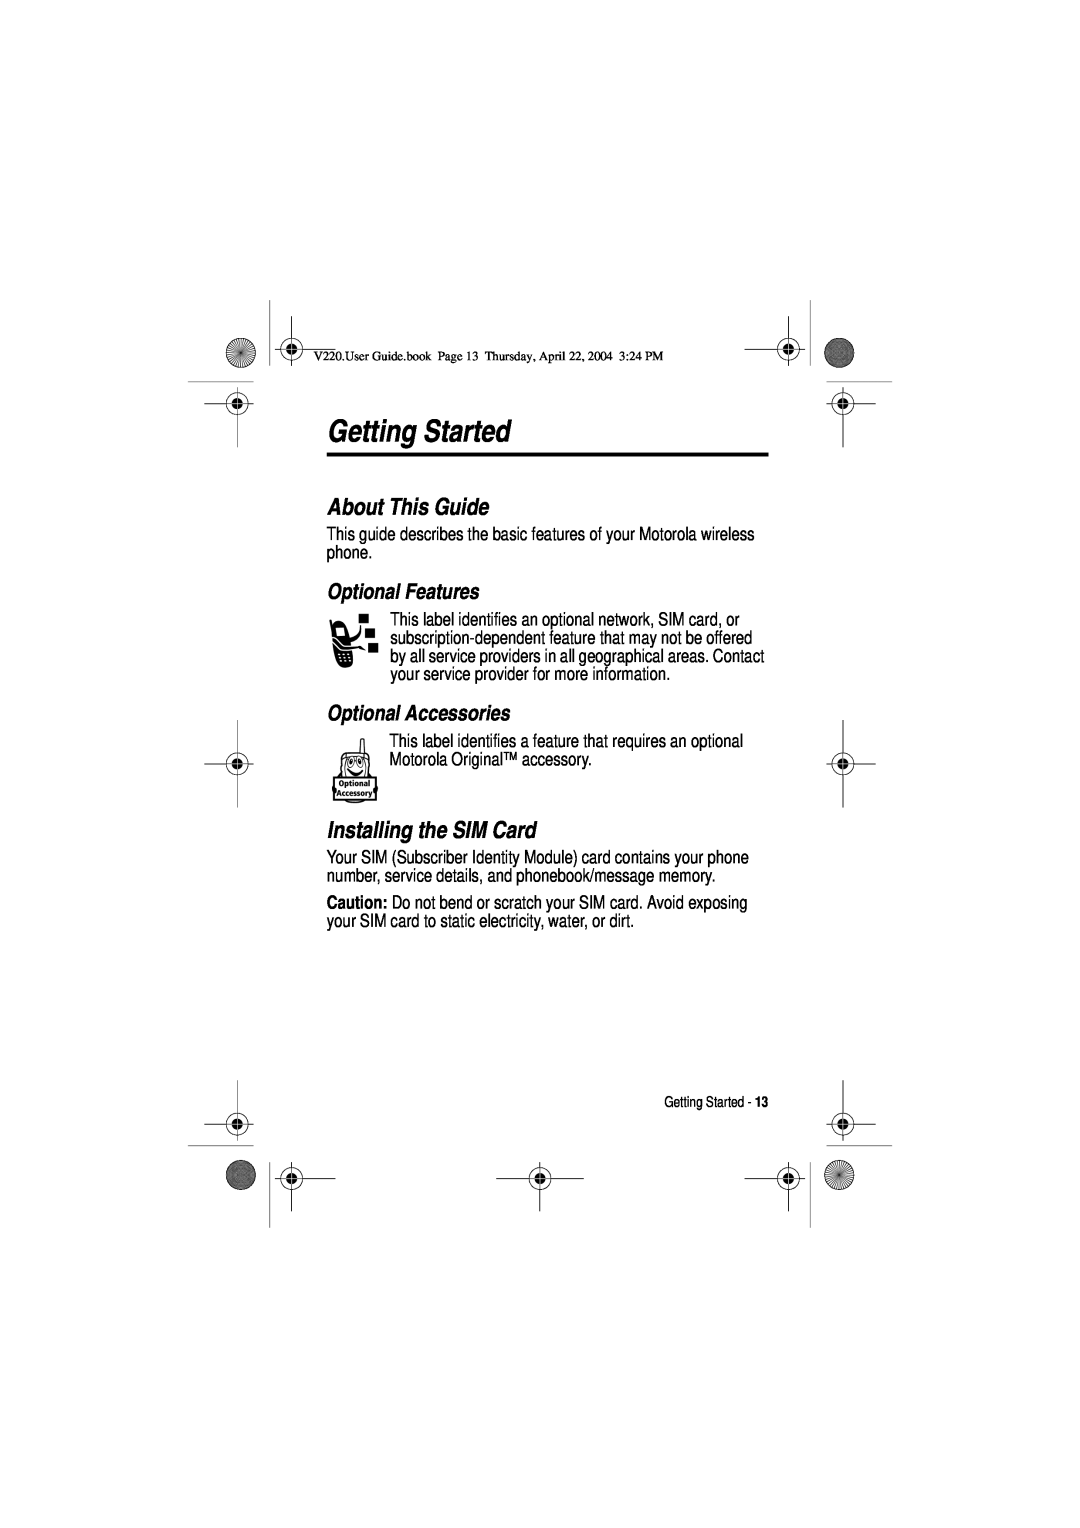 Motorola V220 manual Getting Started, About This Guide, Installing the SIM Card, Optional Features, Optional Accessories 